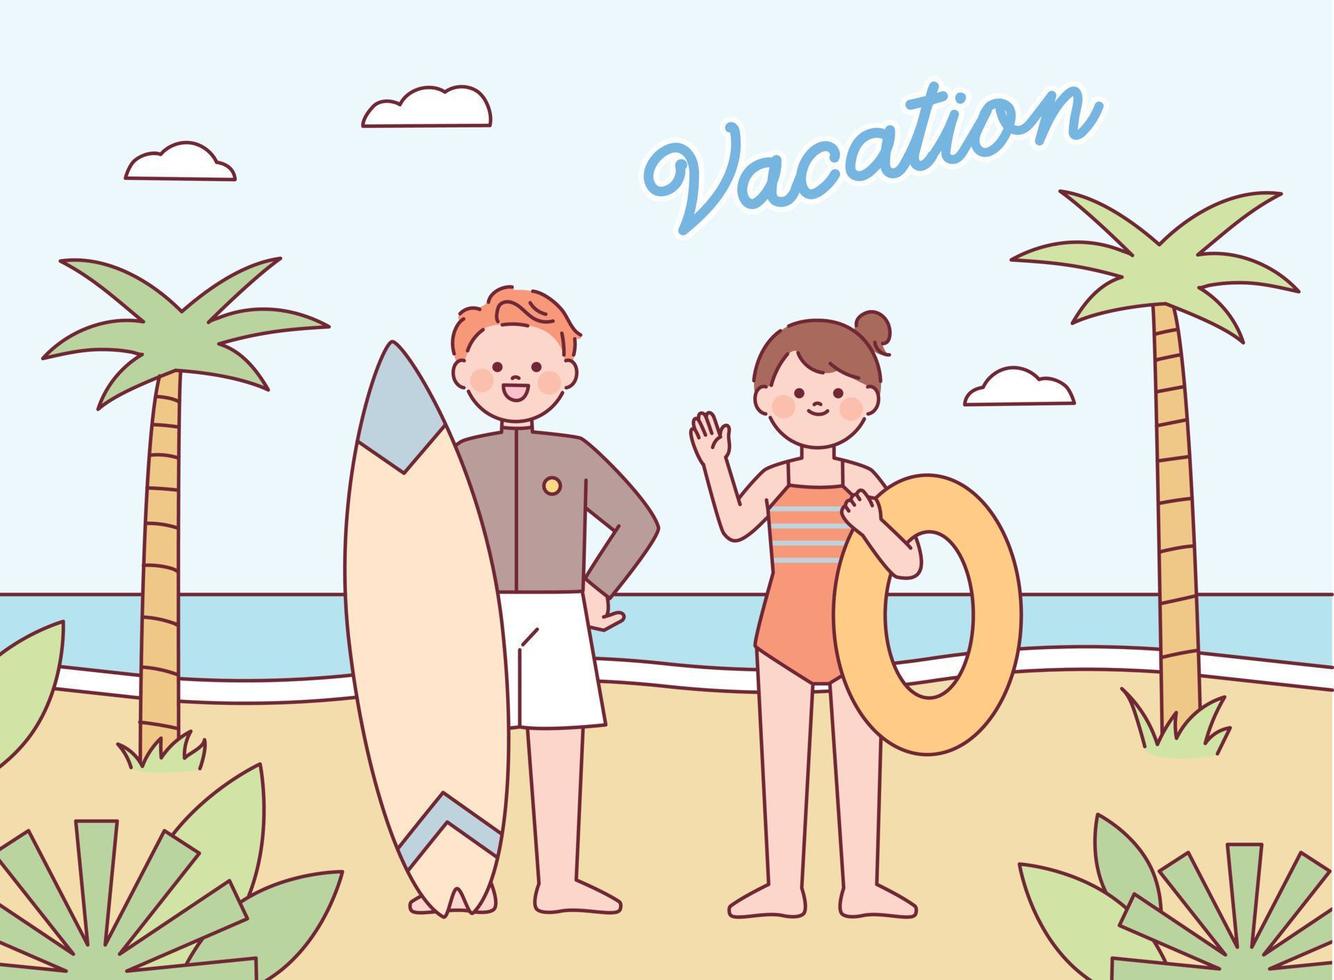 Summer vacation poster. Cute man and woman greeting each other with surfboards and swimming tubes. Tropical island background. vector